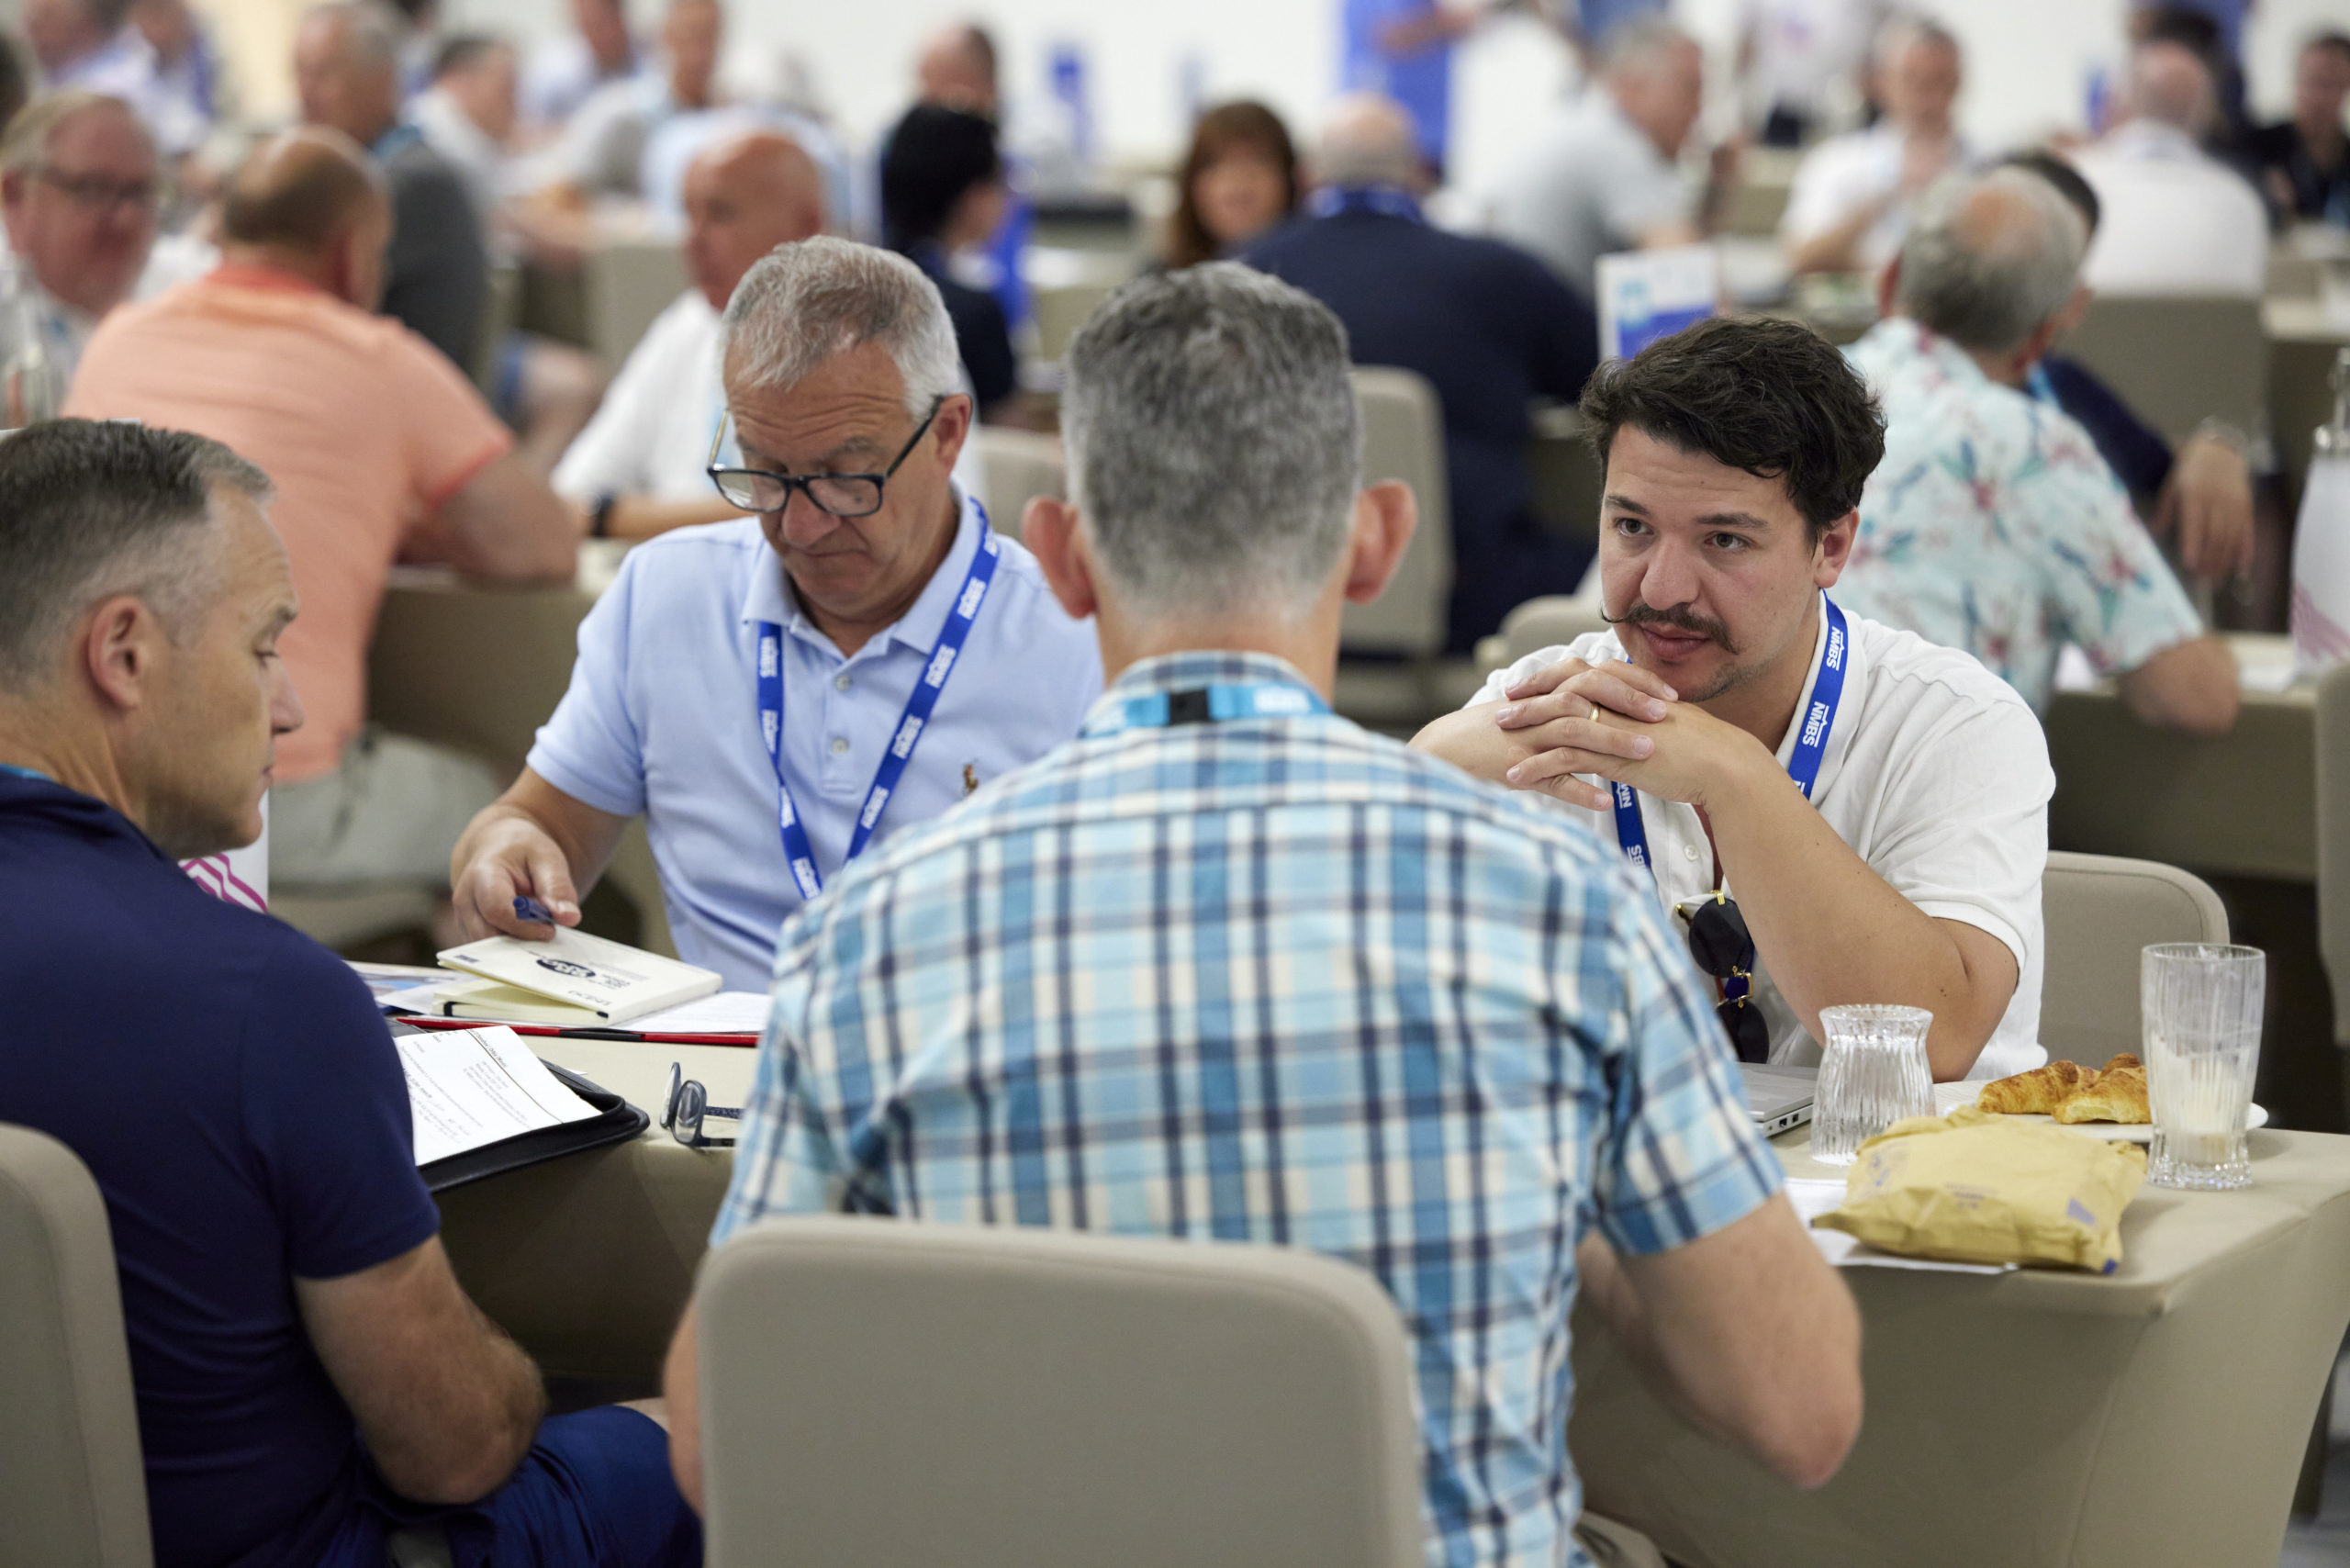 Affording delegates the chance to pause and reflect by stepping away from the maelstrom of day-to-day business, the NMBS All Industry Conference took place recently in Cyprus. PBM catches up on some of the key talking points.